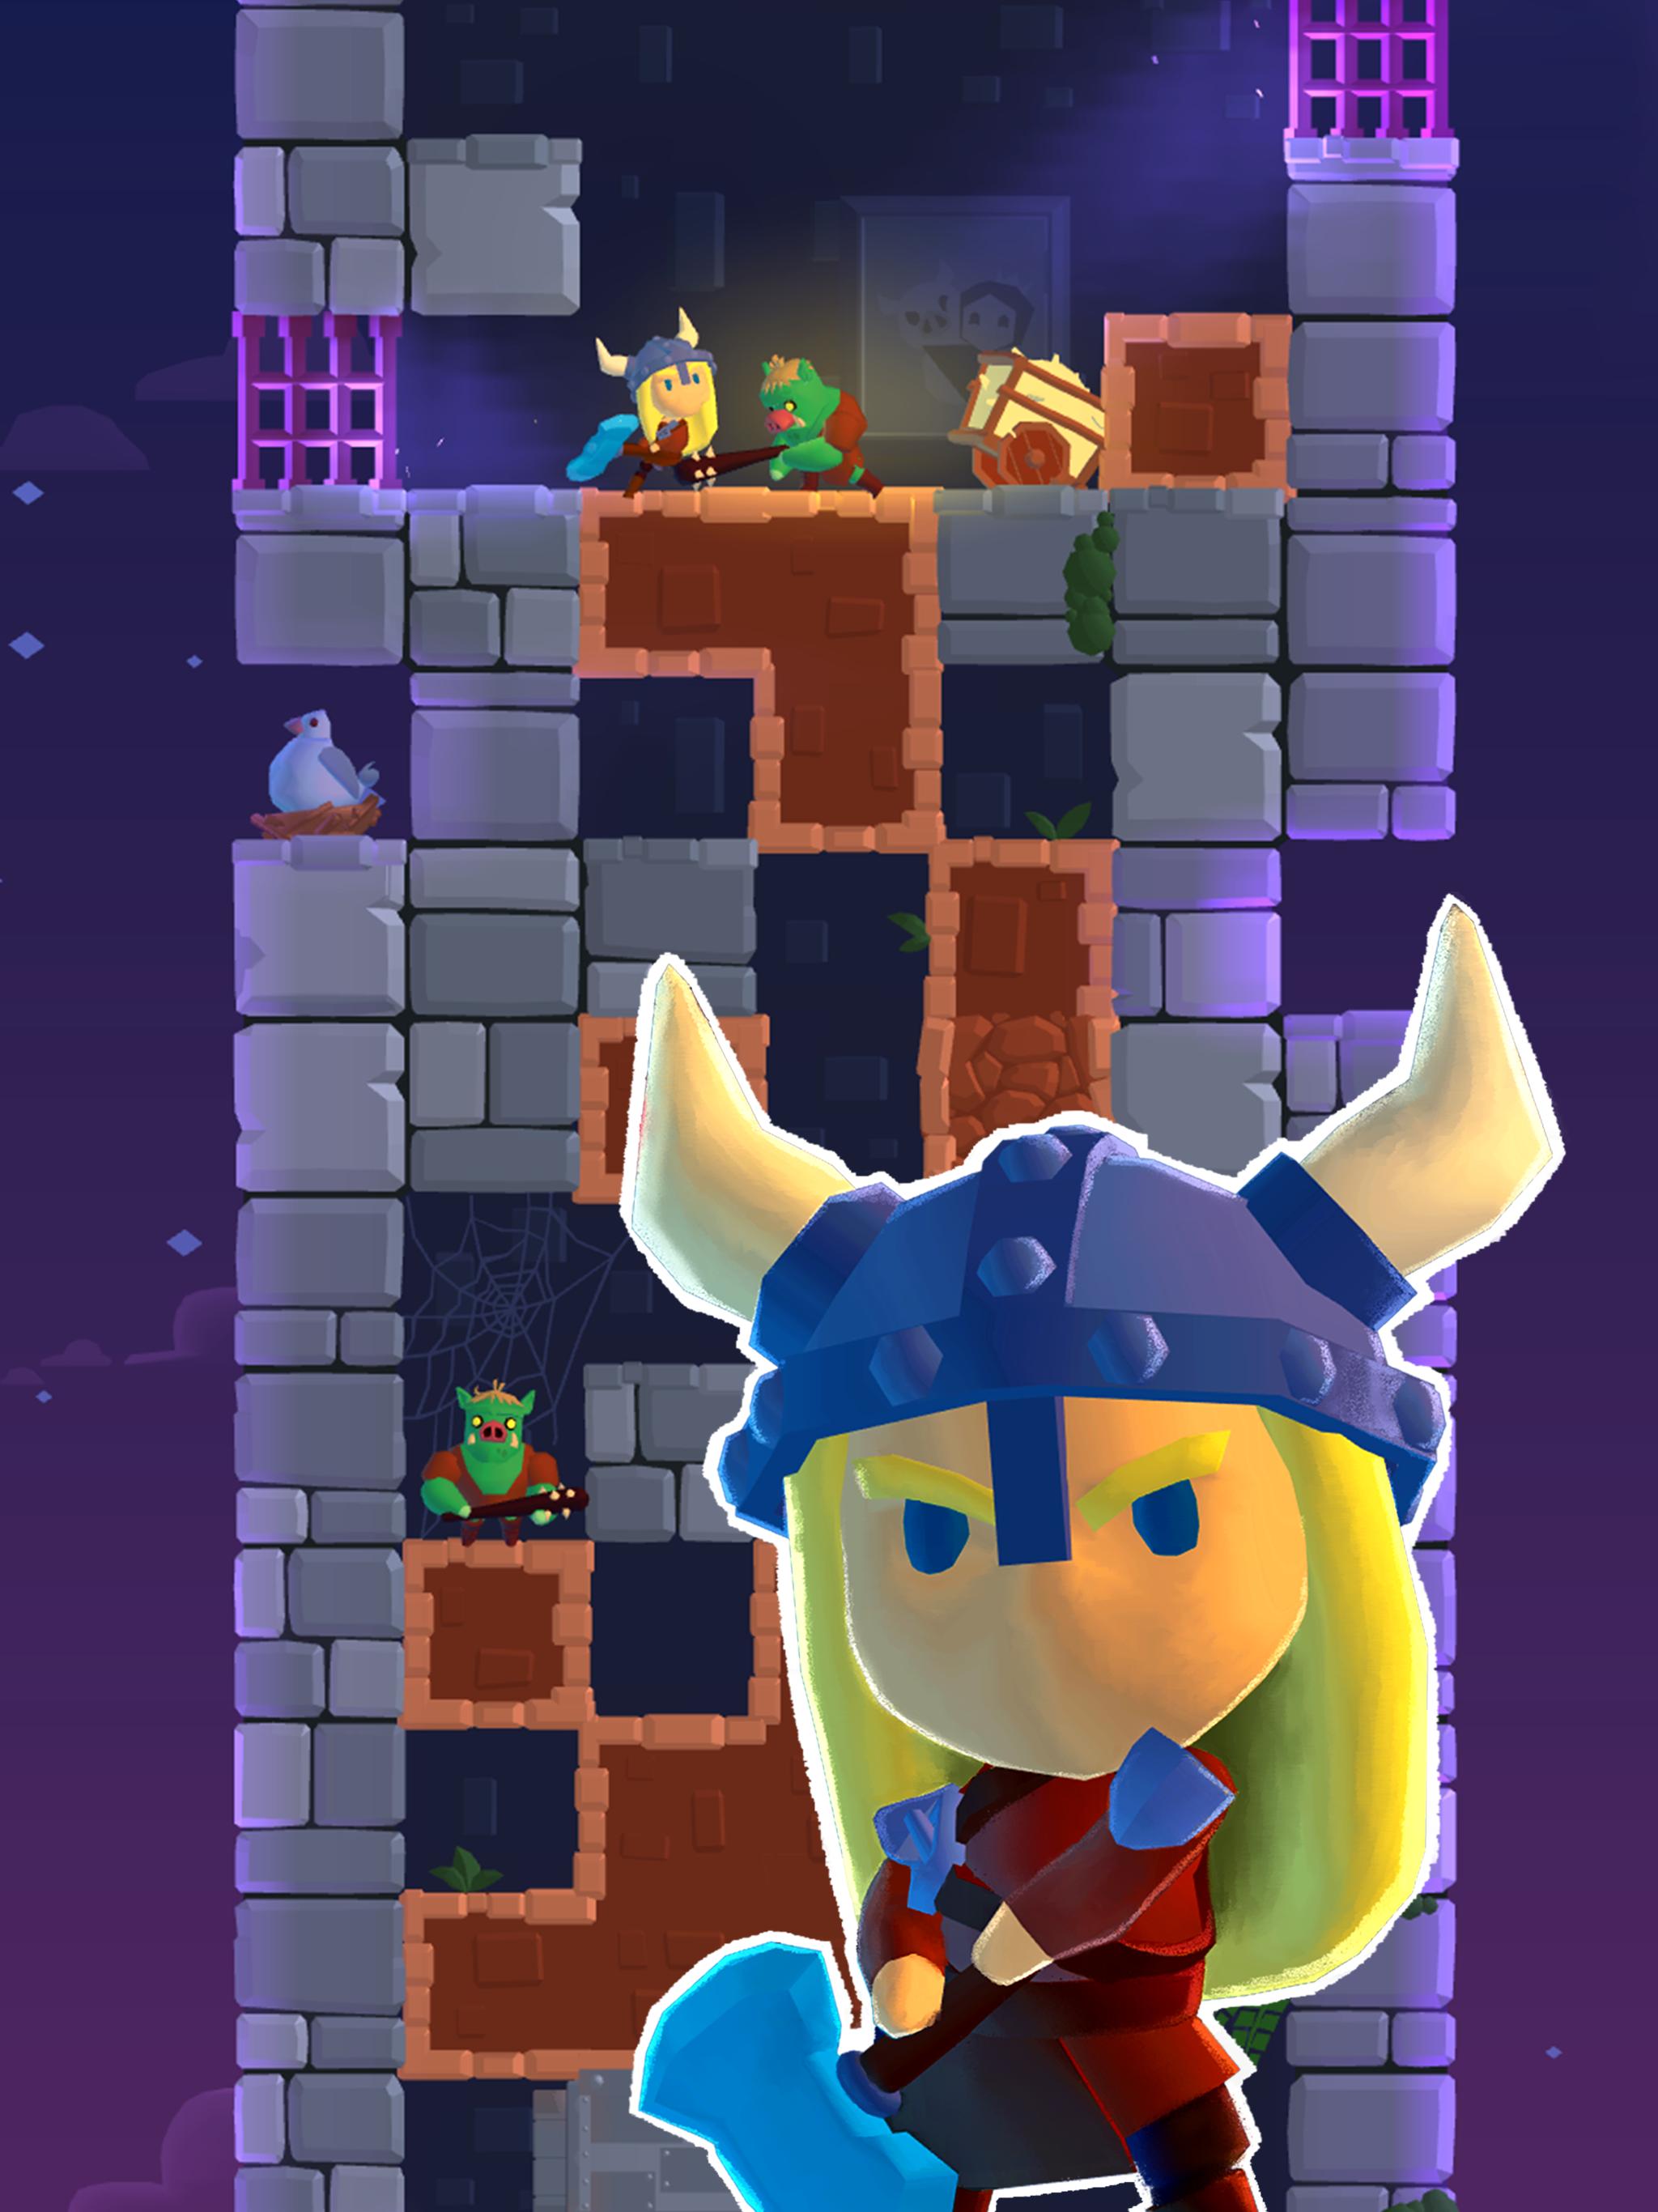 Tower adventures. Игра once upon a Tower. Once upon a Tower принцессы. Tower Princess игра. Игра "башня".